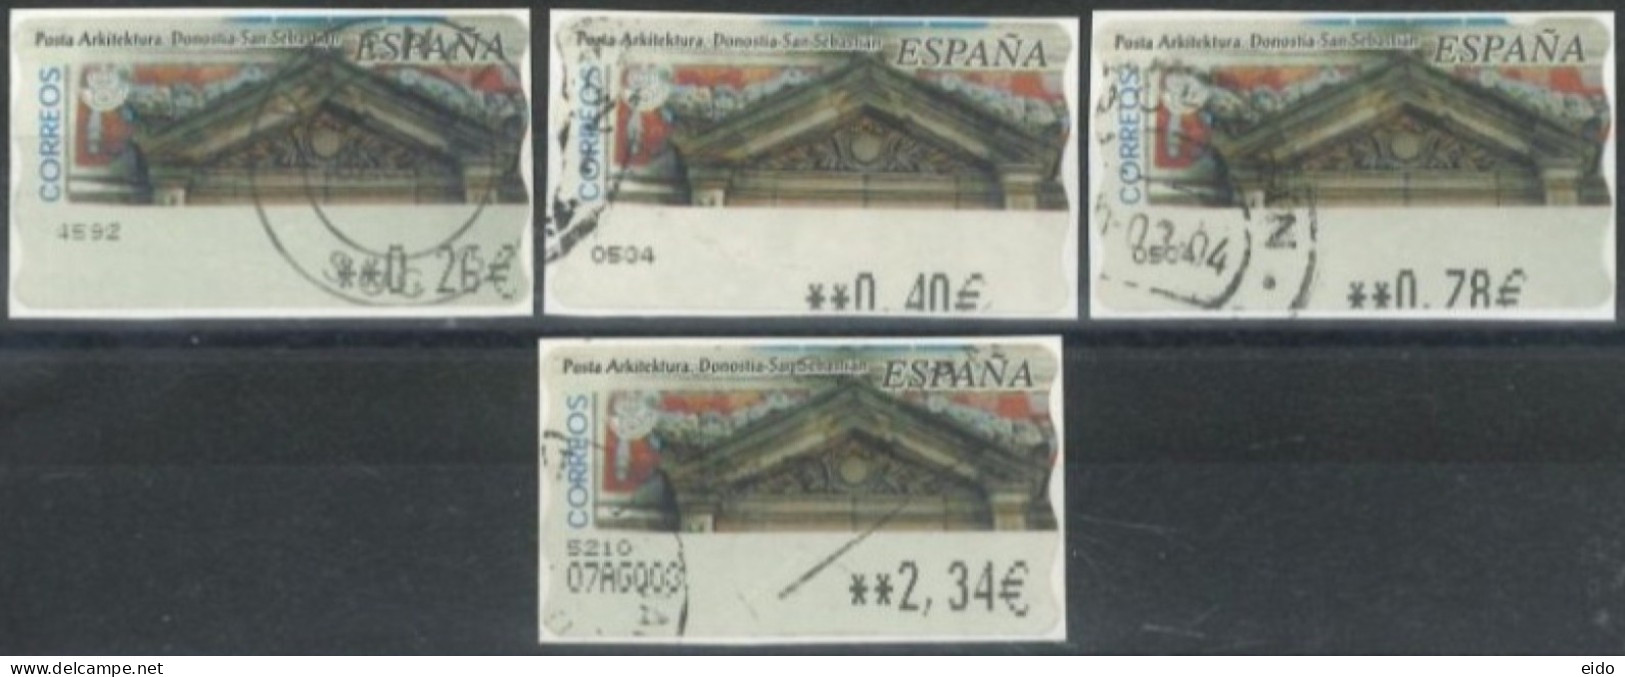 SPAIN- 2004, SAN SABASTIAN ARCHITECTURE STAMPS LABELS SET OF 4, DIFFERENT VALUES, USED. - Usati